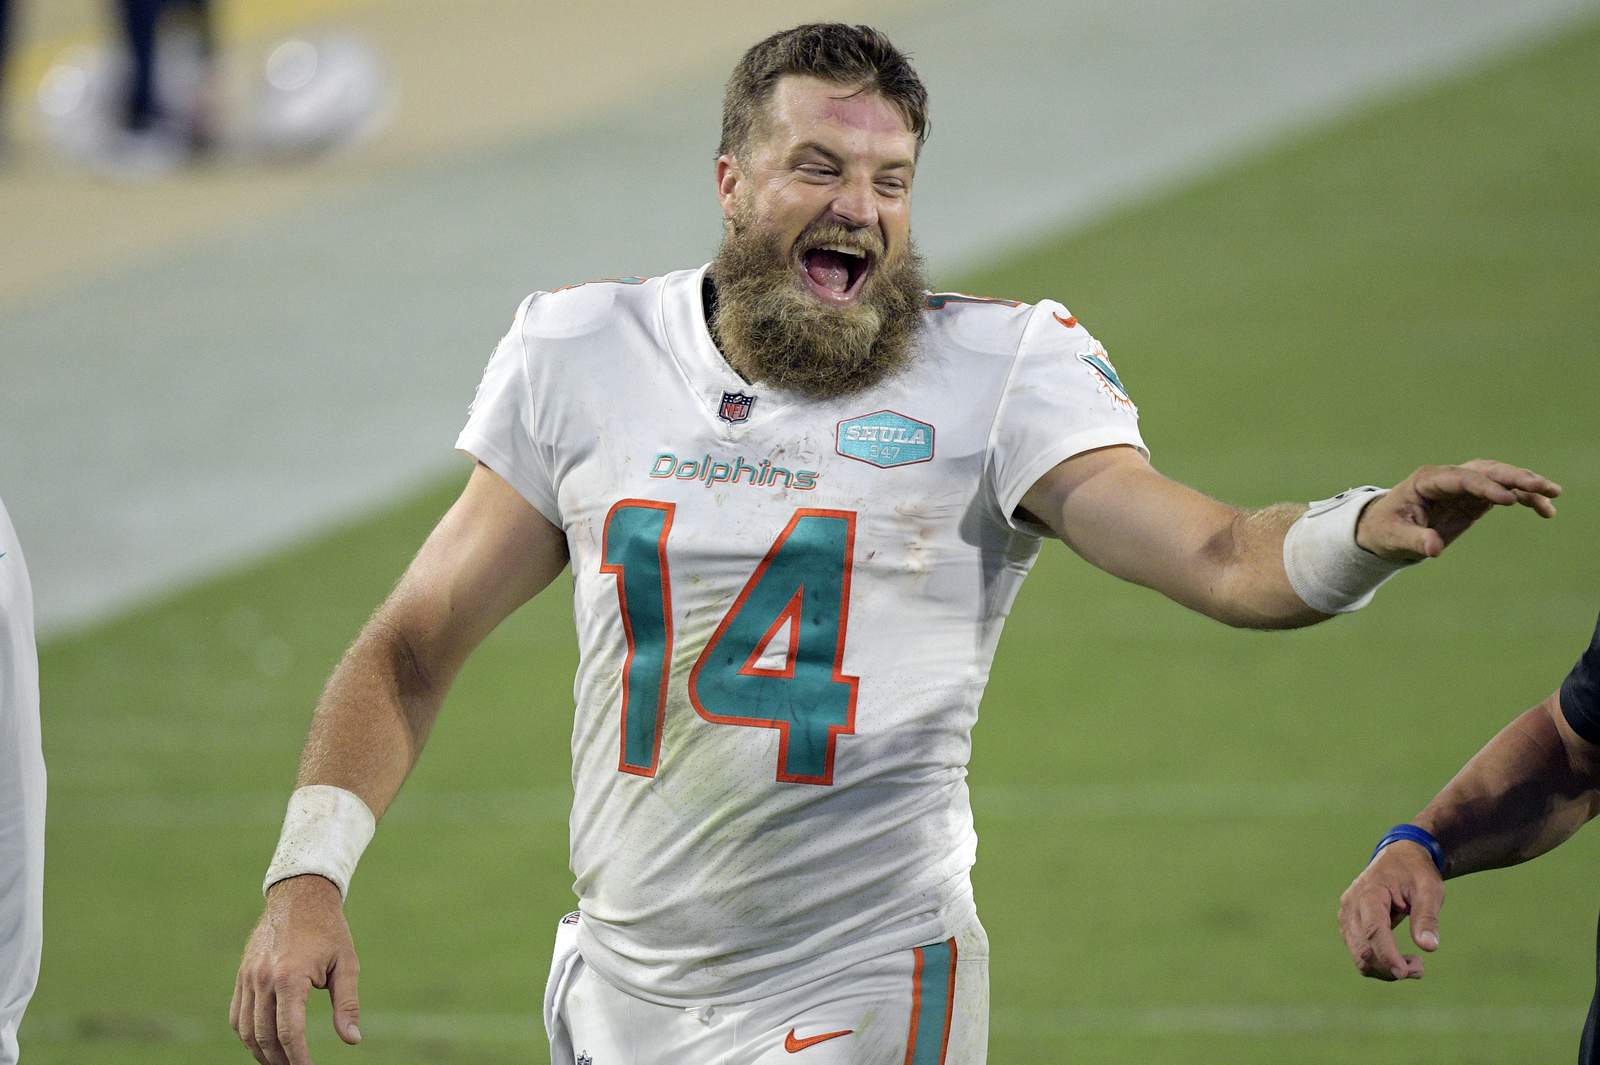 Fitzpatrick handles Jaguars again as Dolphins get first win